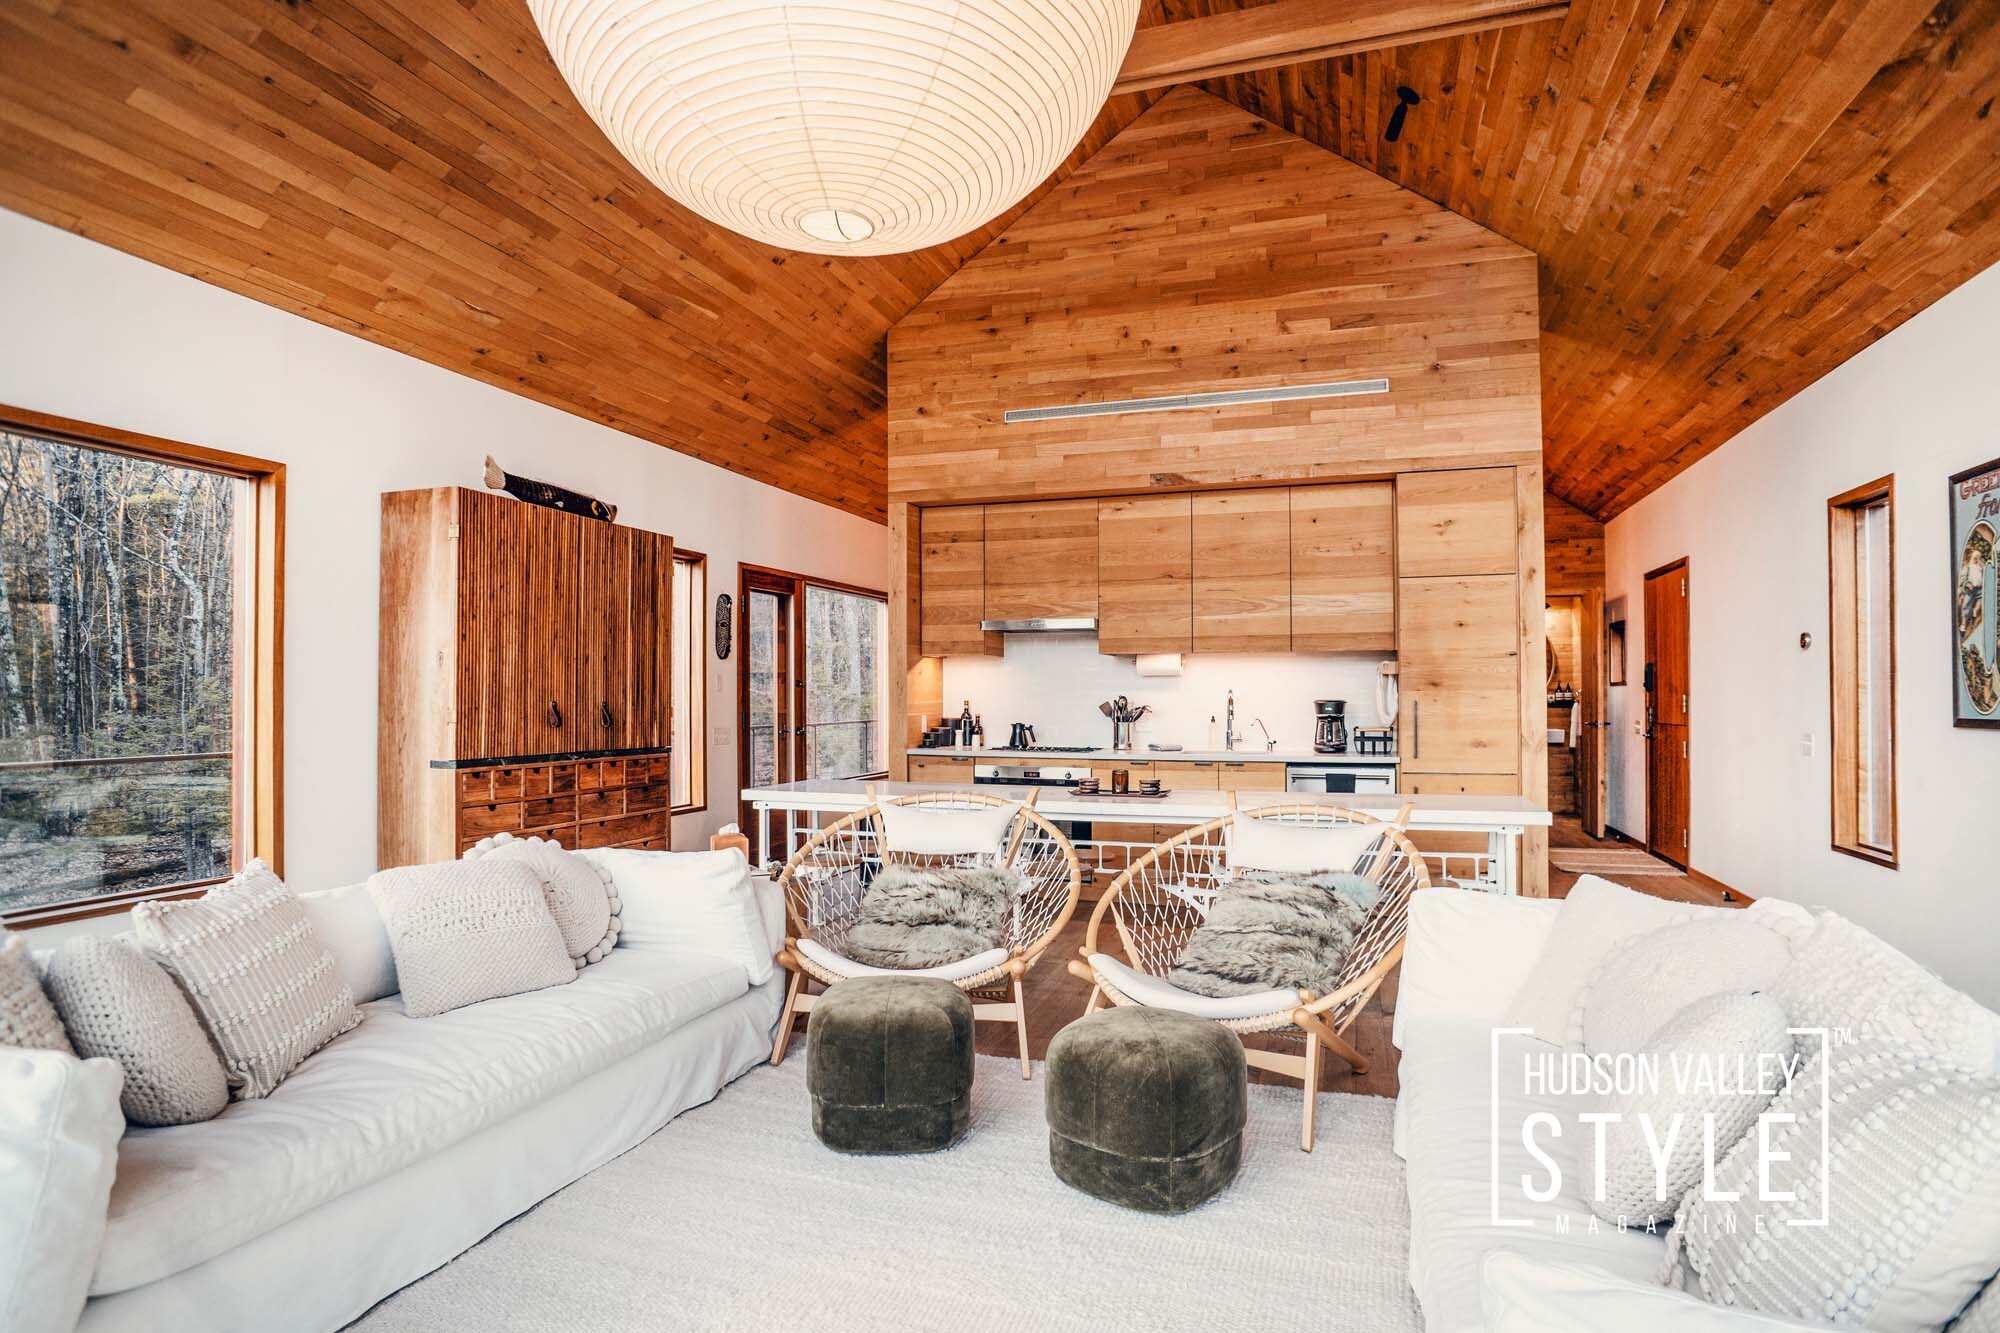 5 Reasons Maxwell Alexander is The Best Real Estate Photographer in New York